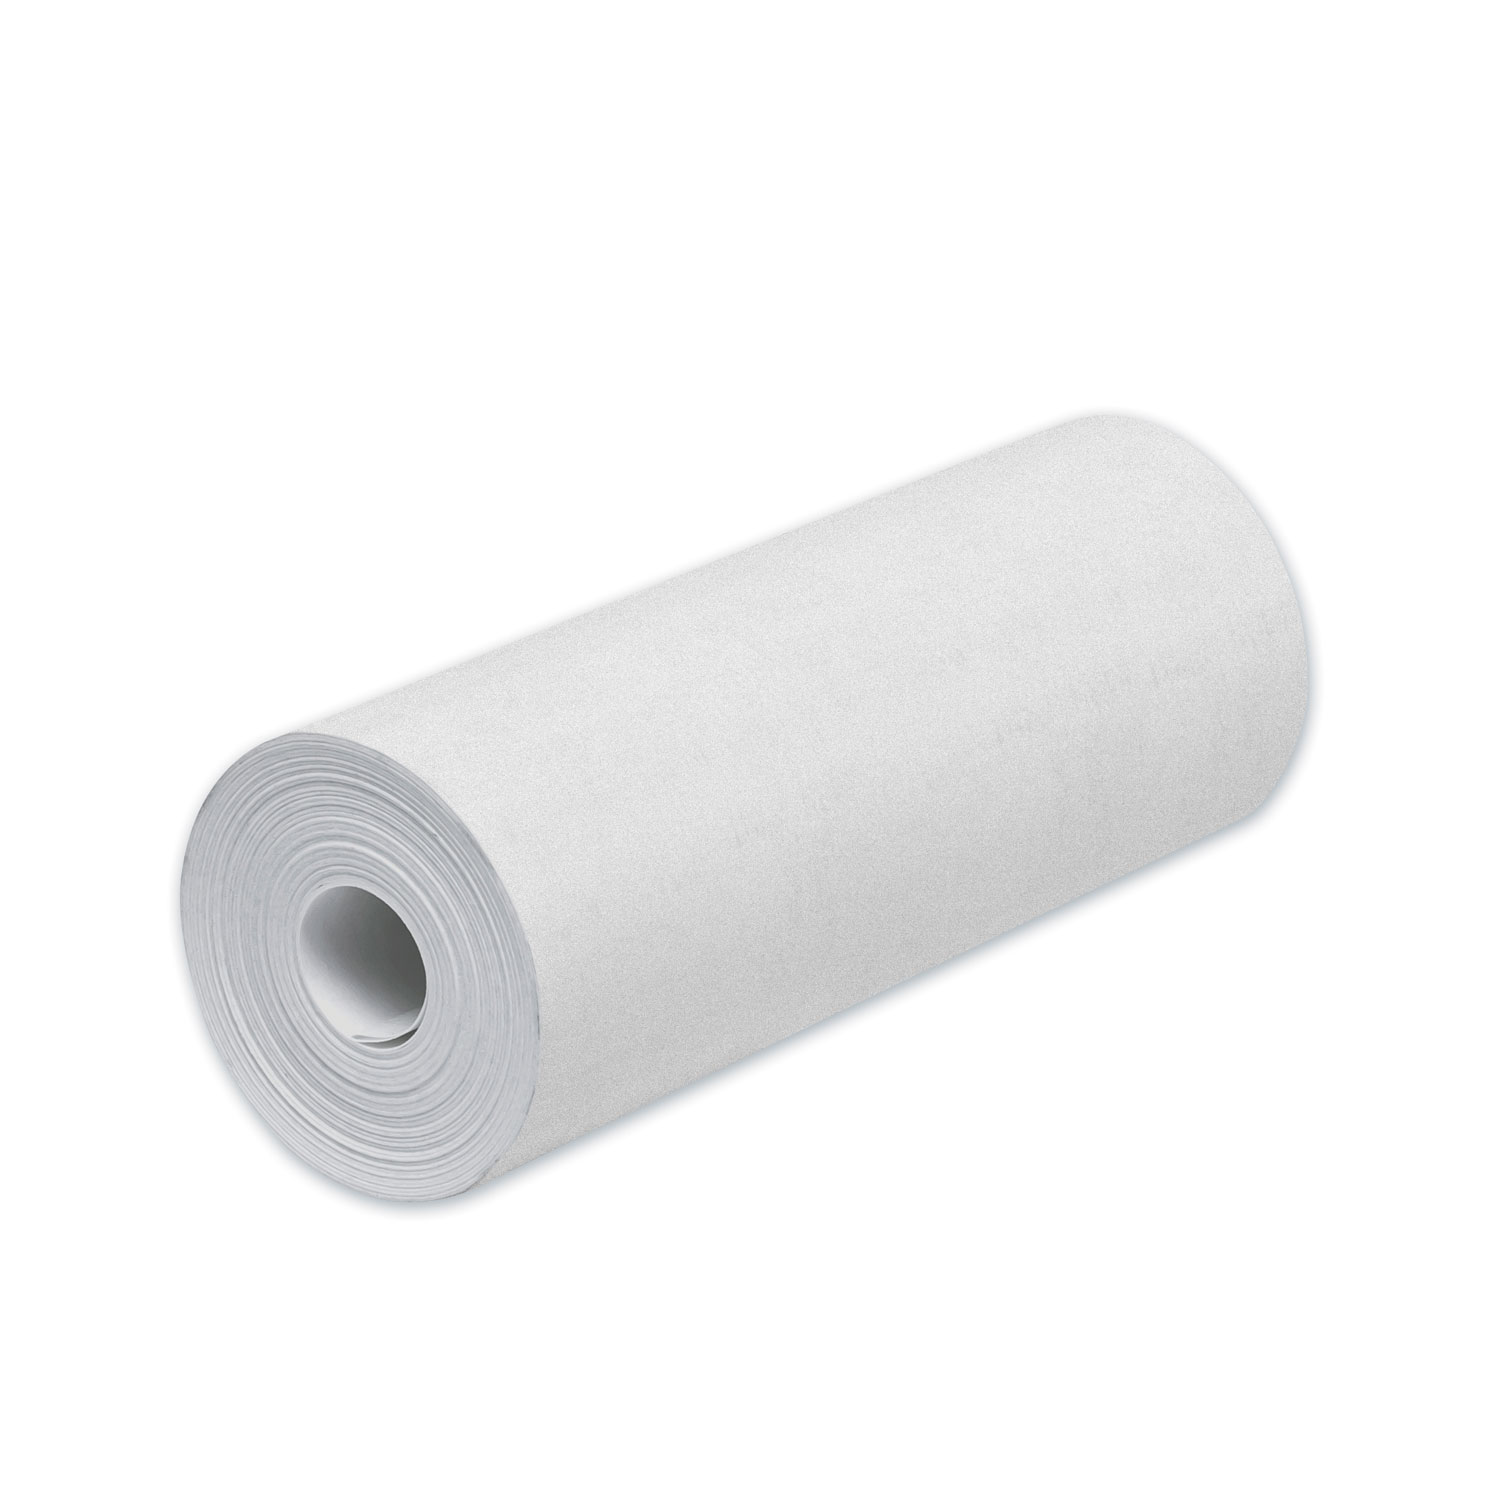 Iconex™ Direct Thermal Printing Thermal Paper Rolls, 2.25 x 24 ft, White, 100/Carton